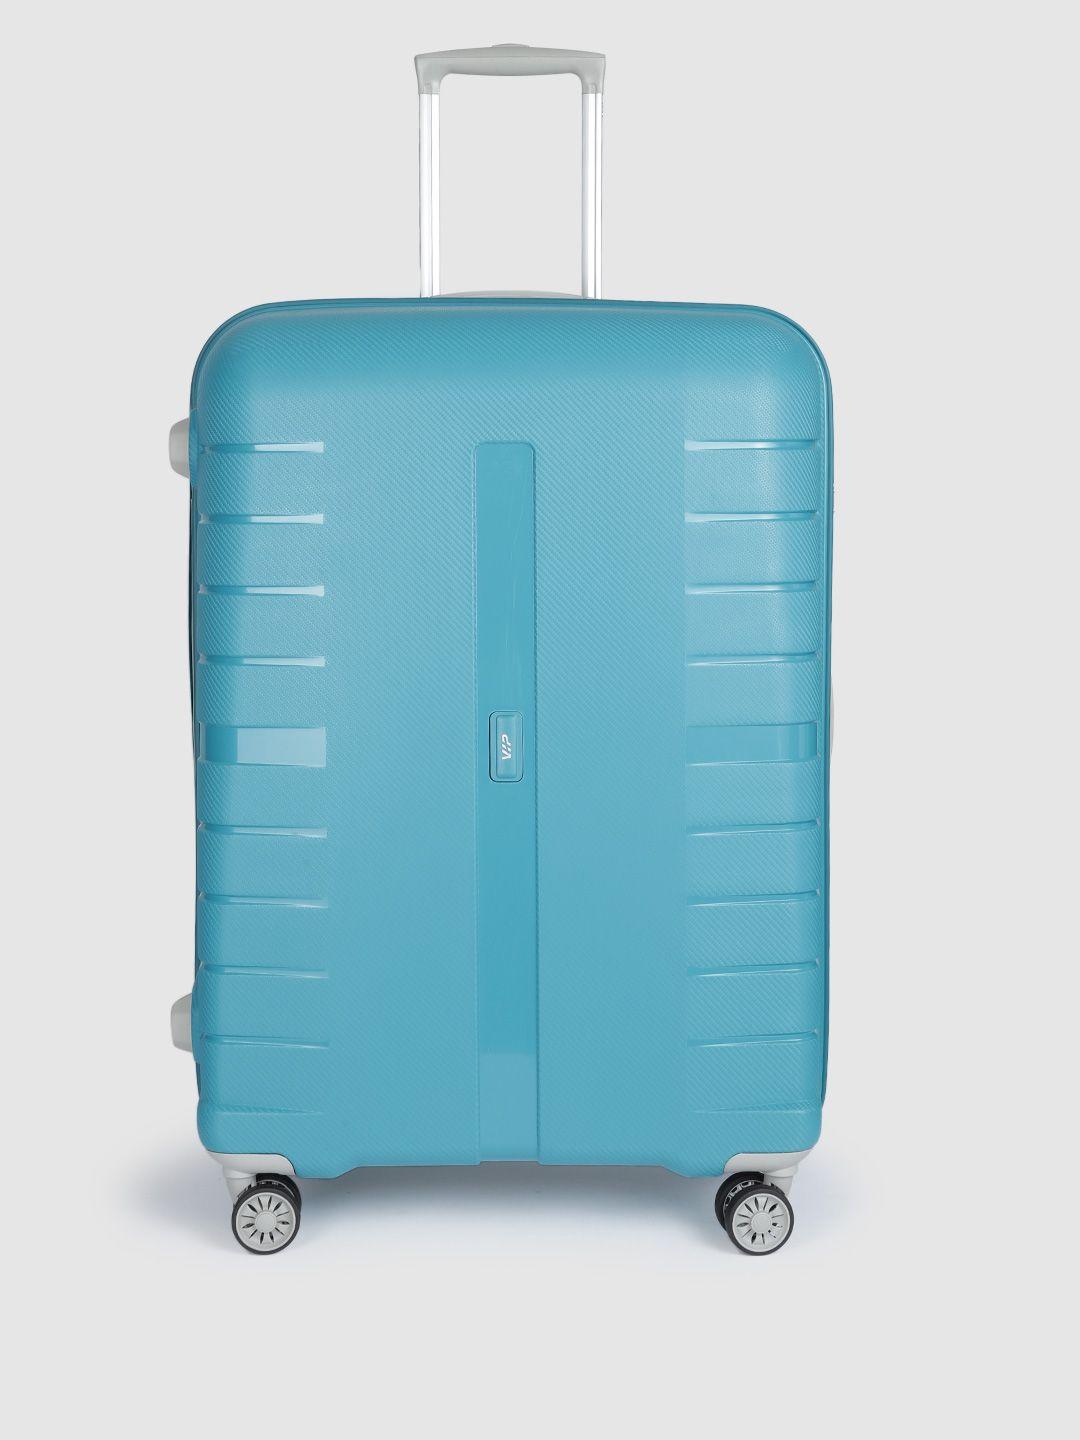 vip unisex teal blue textured hard-sided large voyager pro trolley bag- 130 litres